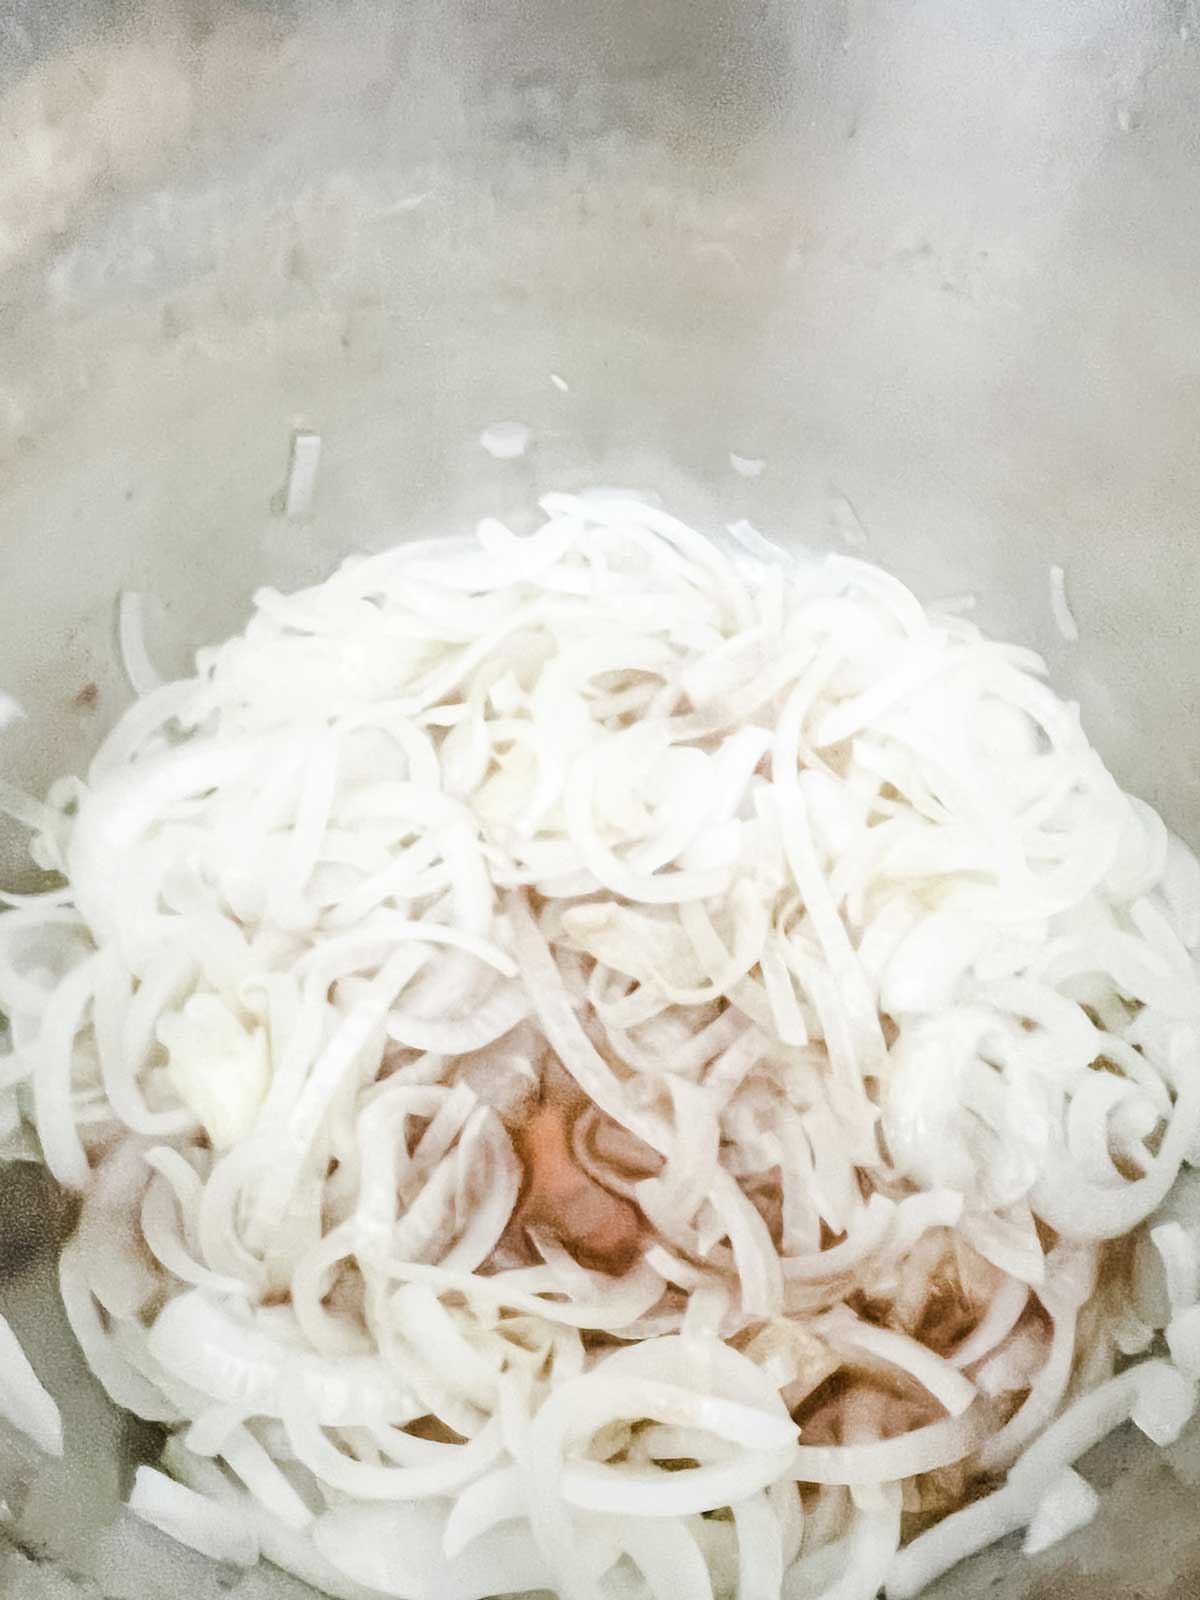 Photo of onions and liquids in an Instant Pot.